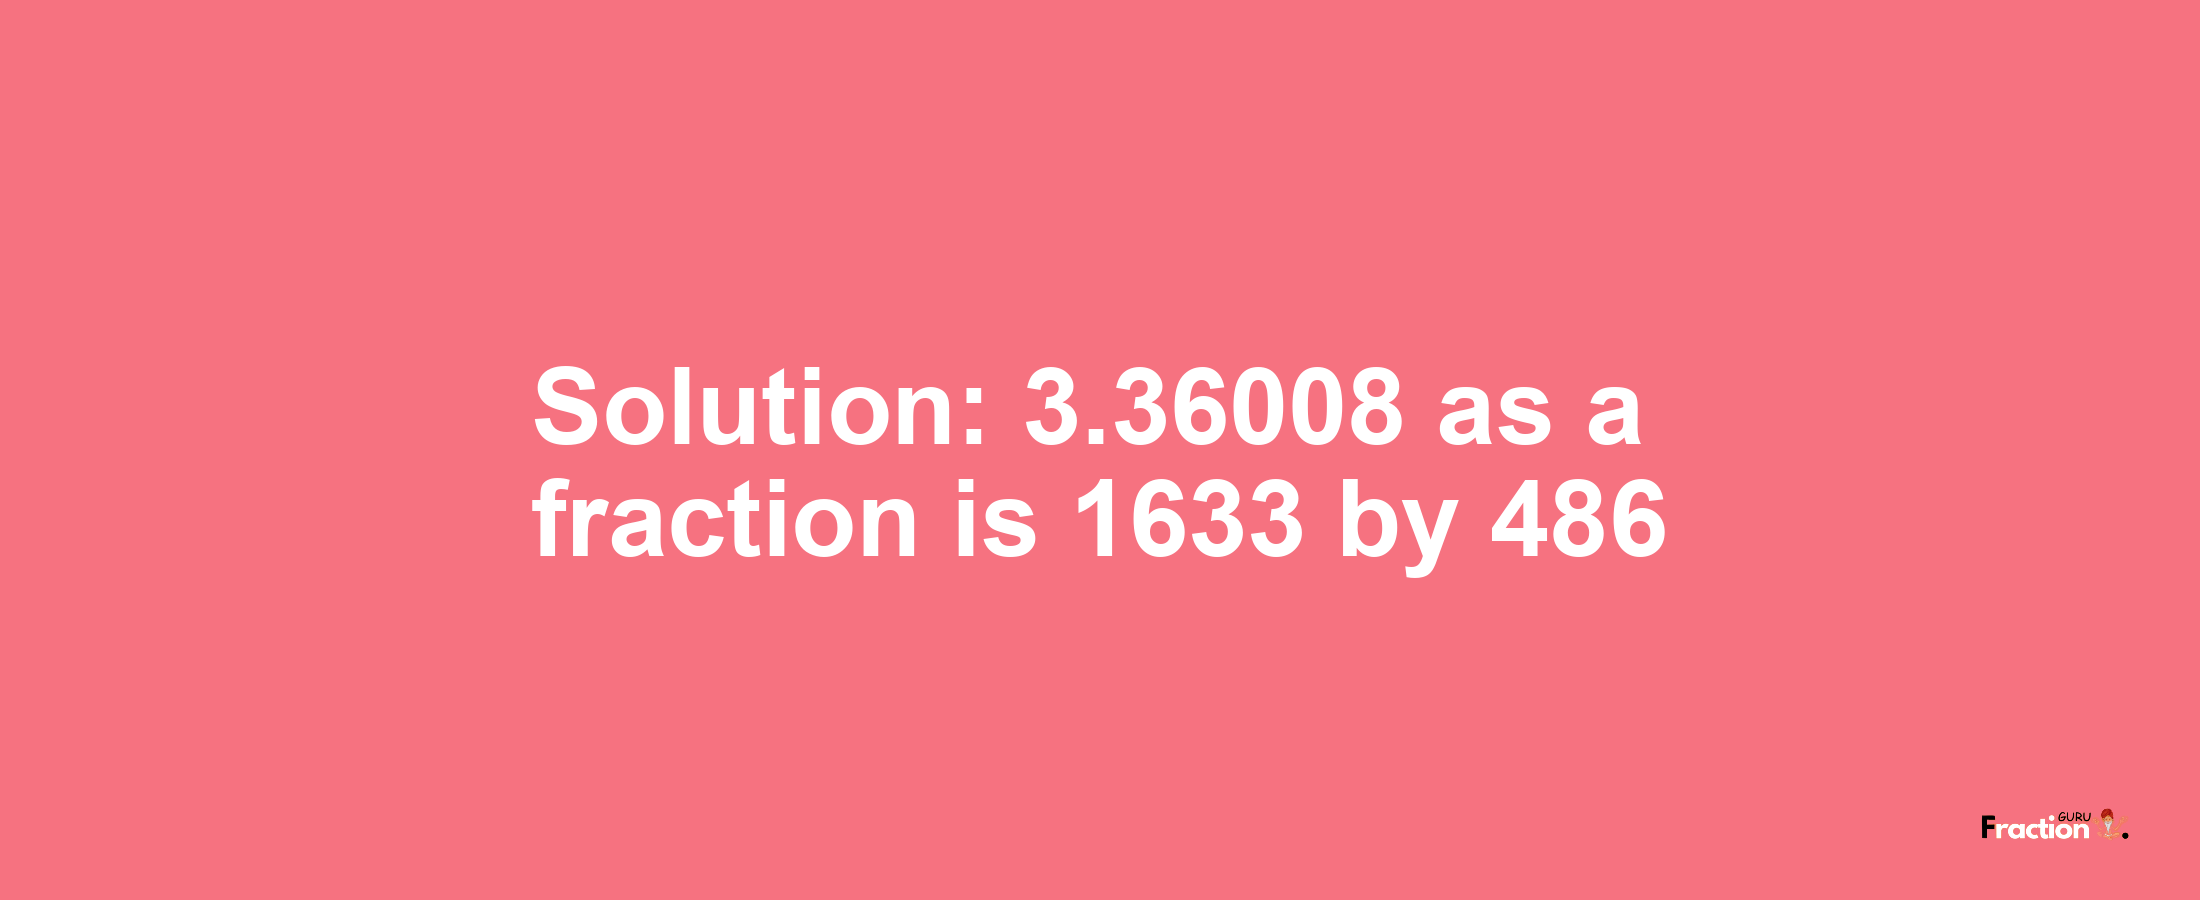 Solution:3.36008 as a fraction is 1633/486